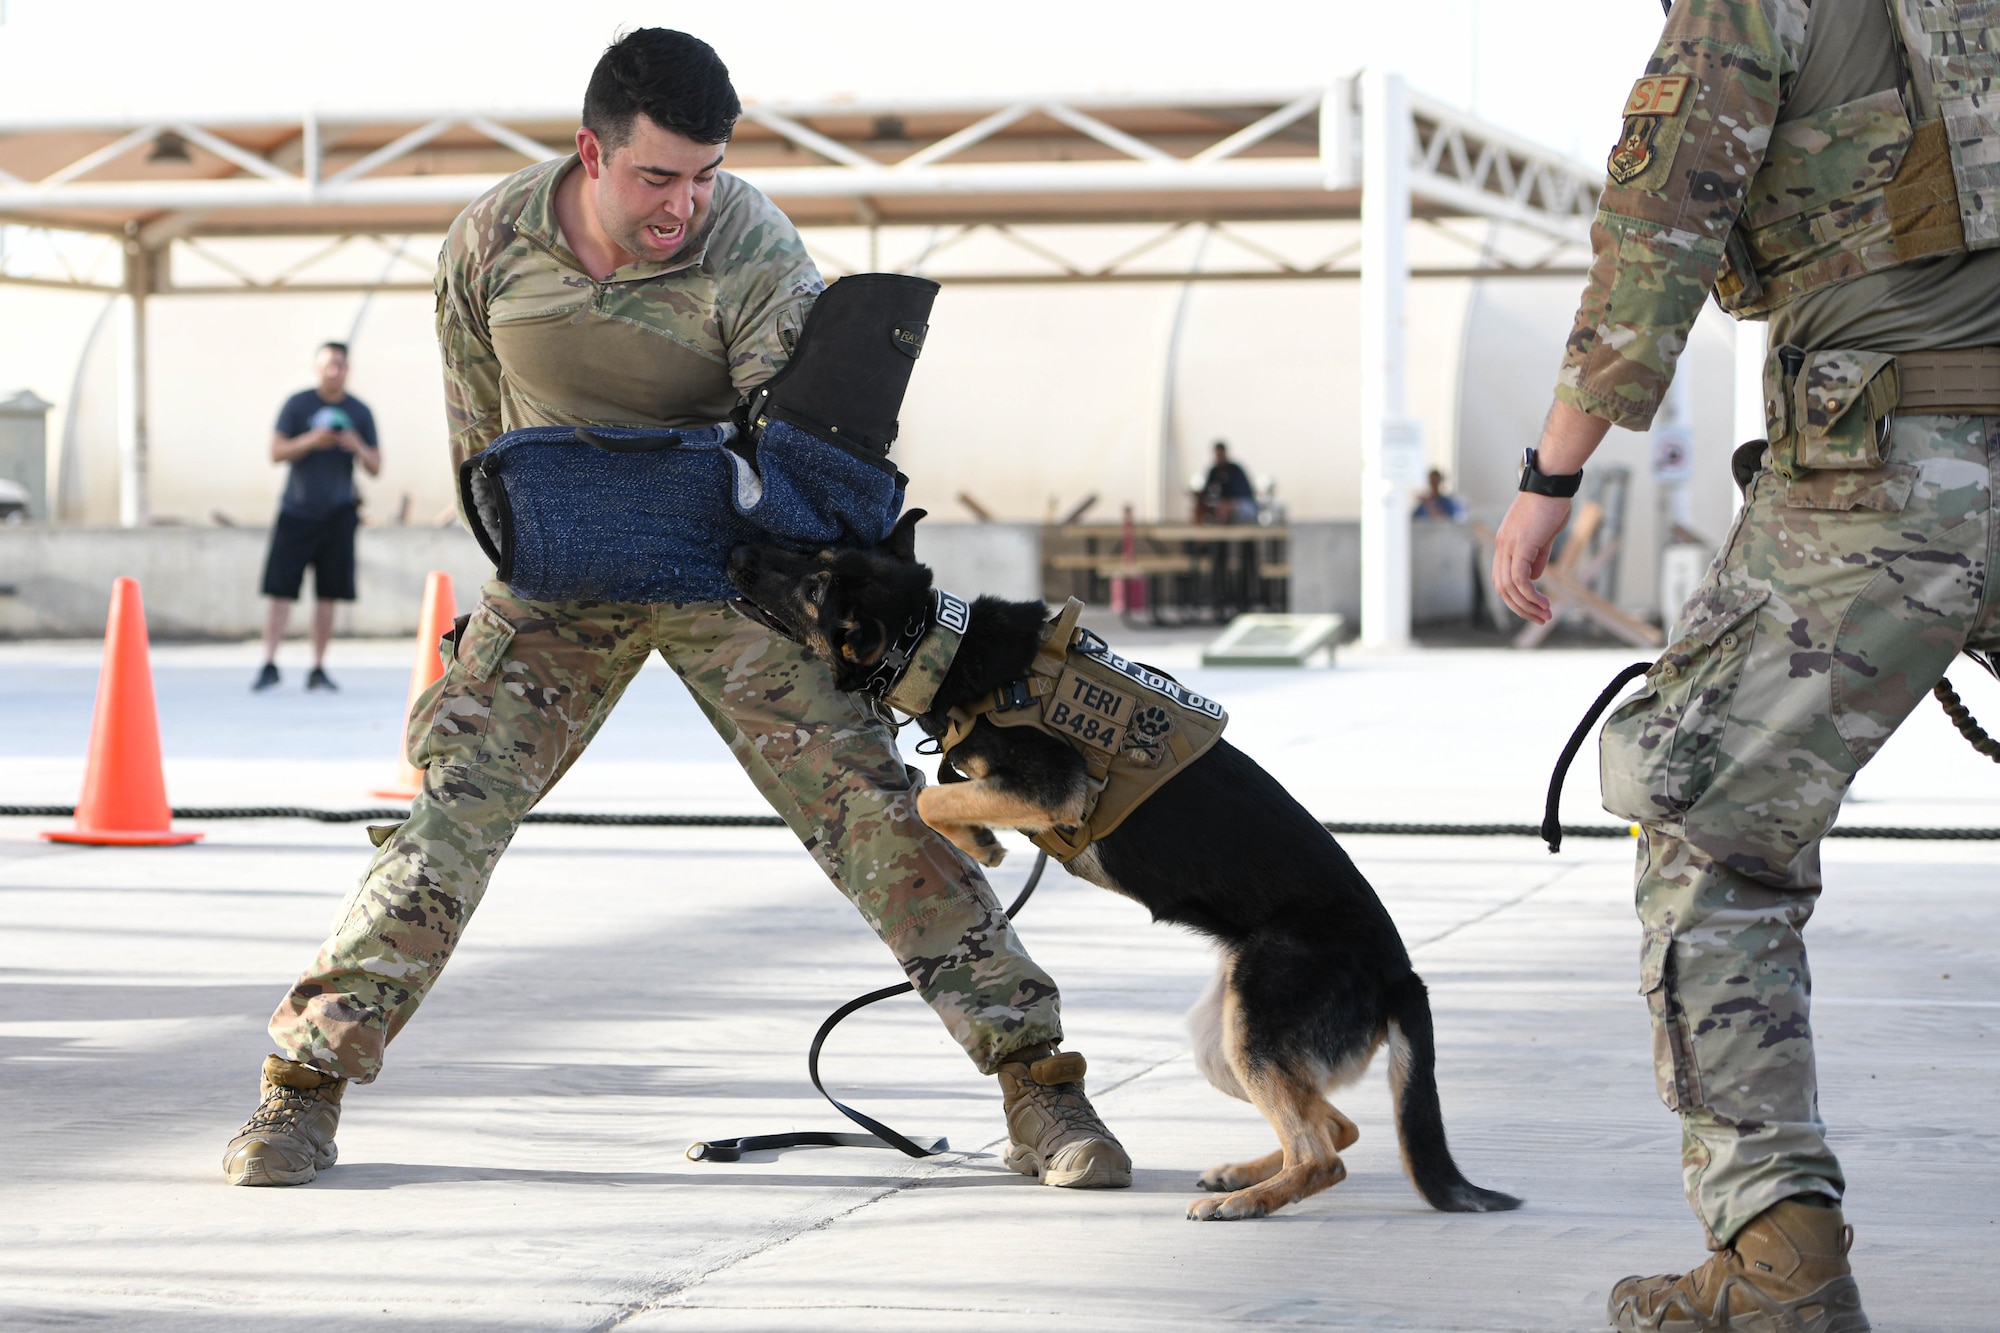 Teri, a military working dog with the 380th Expeditionary Security Forces Squadron, attacks Staff Sgt. Sean Tucker, a 380th ESFS military working dog handler, during a MWD demonstration, May 20, 2022 at Al Dhafra Air Base, United Arab Emirates. The U.S. military uses MWDs in all branches of service and they are trained for specific jobs, including tracking, explosive detection, patrol, search and rescue, and attack.